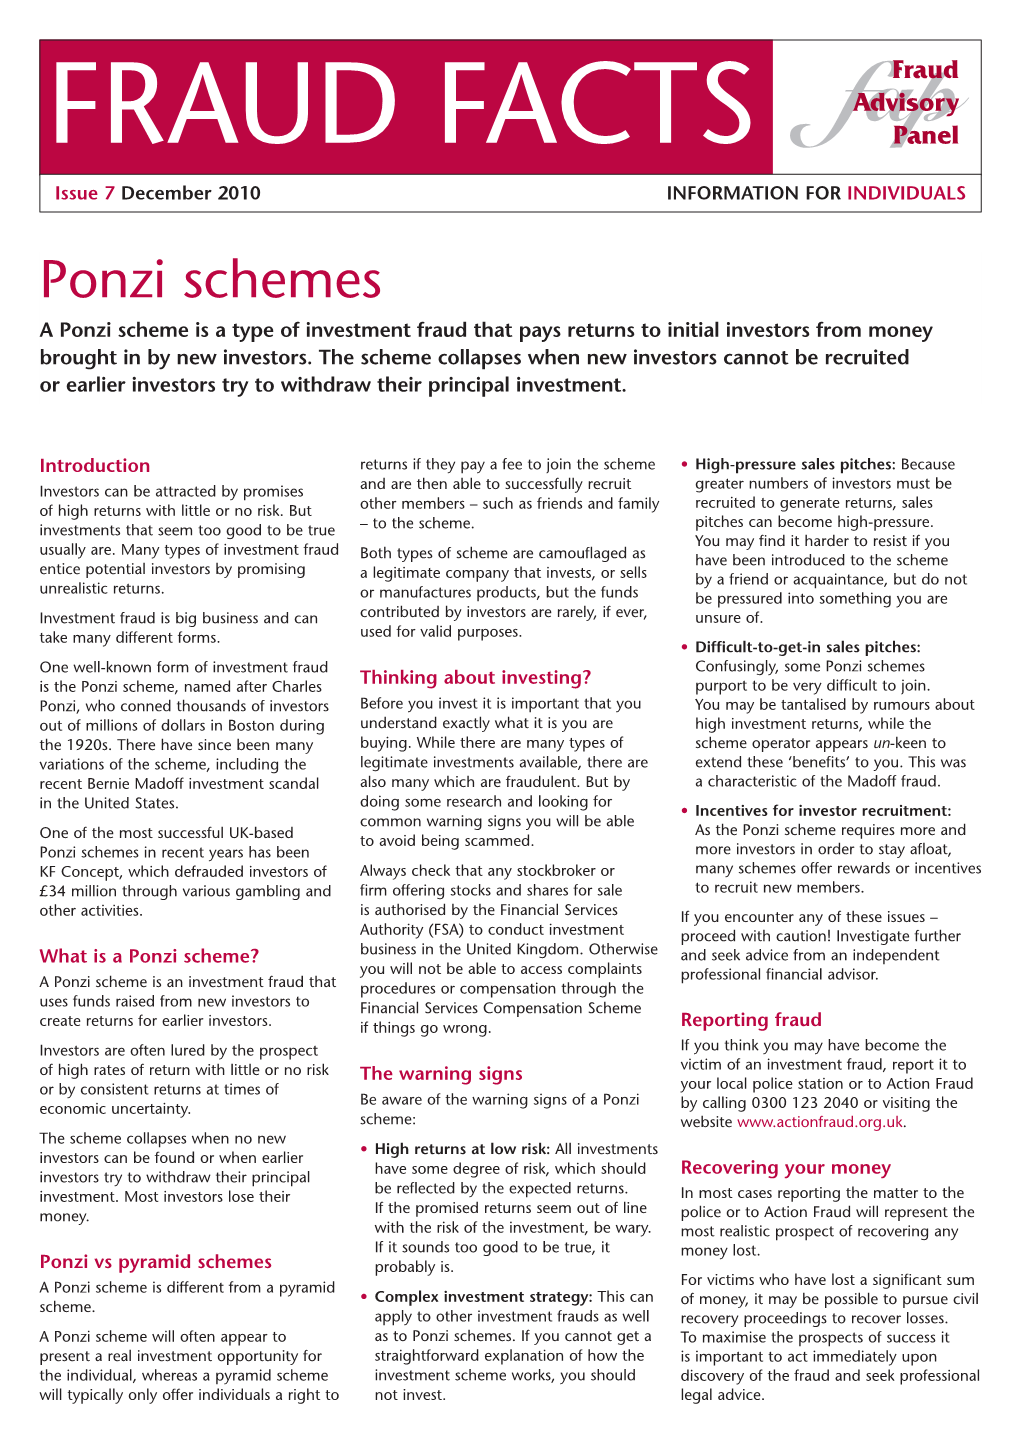 FRAUD FACTS Issue 7 December 2010 INFORMATION for INDIVIDUALS